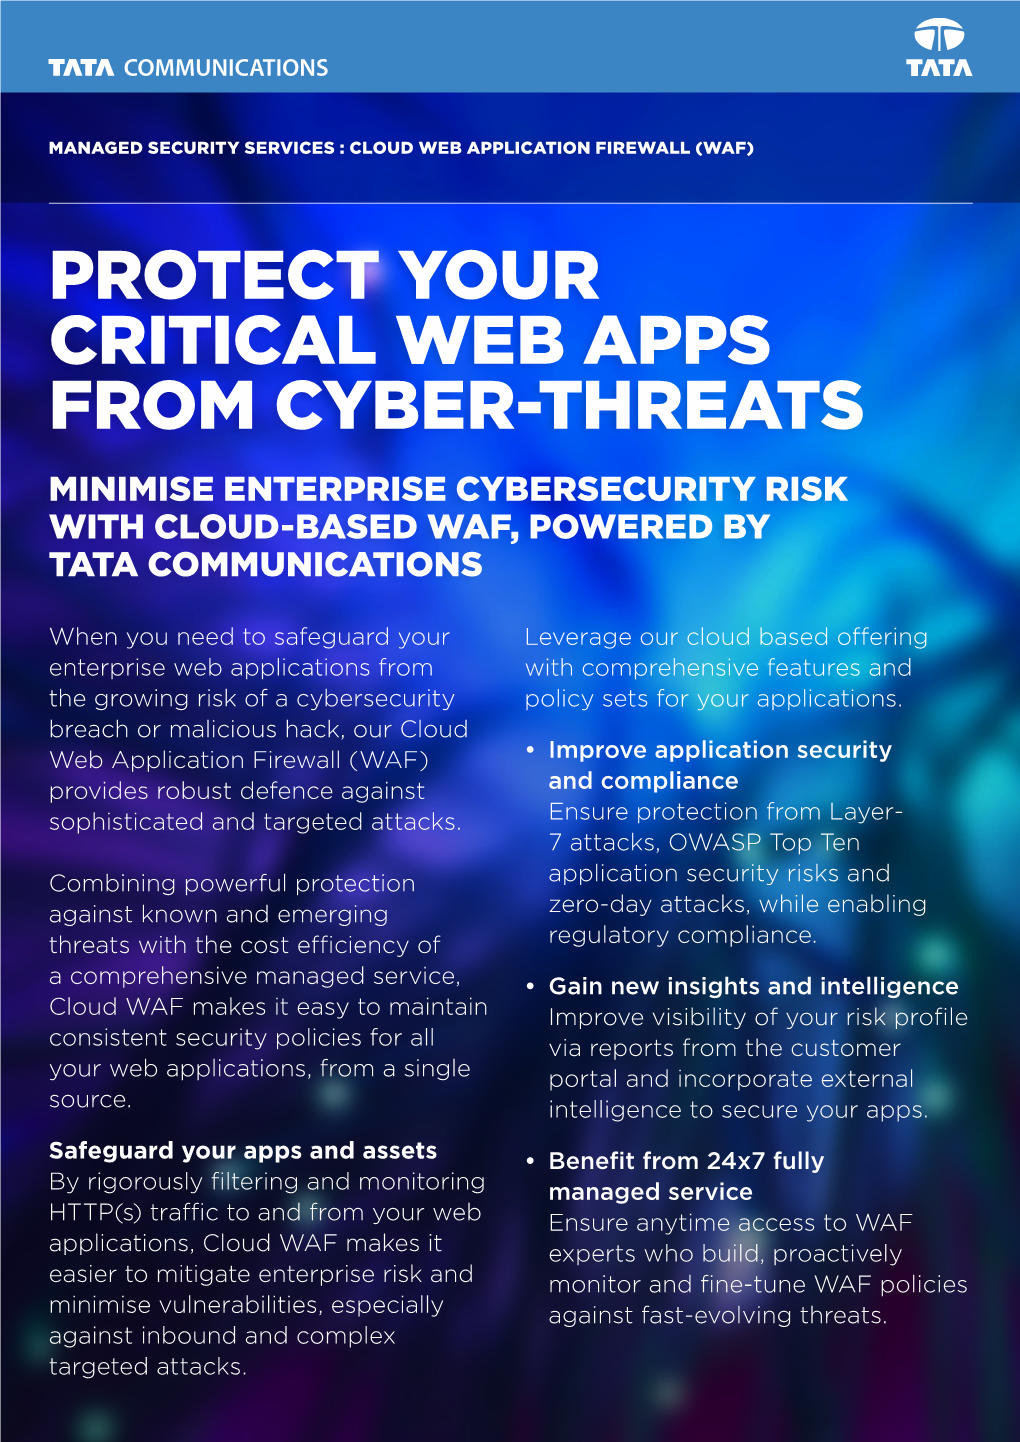 Protect Your Critical Web Apps from Cyber-Threats Minimise Enterprise Cybersecurity Risk with Cloud-Based Waf, Powered by Tata Communications